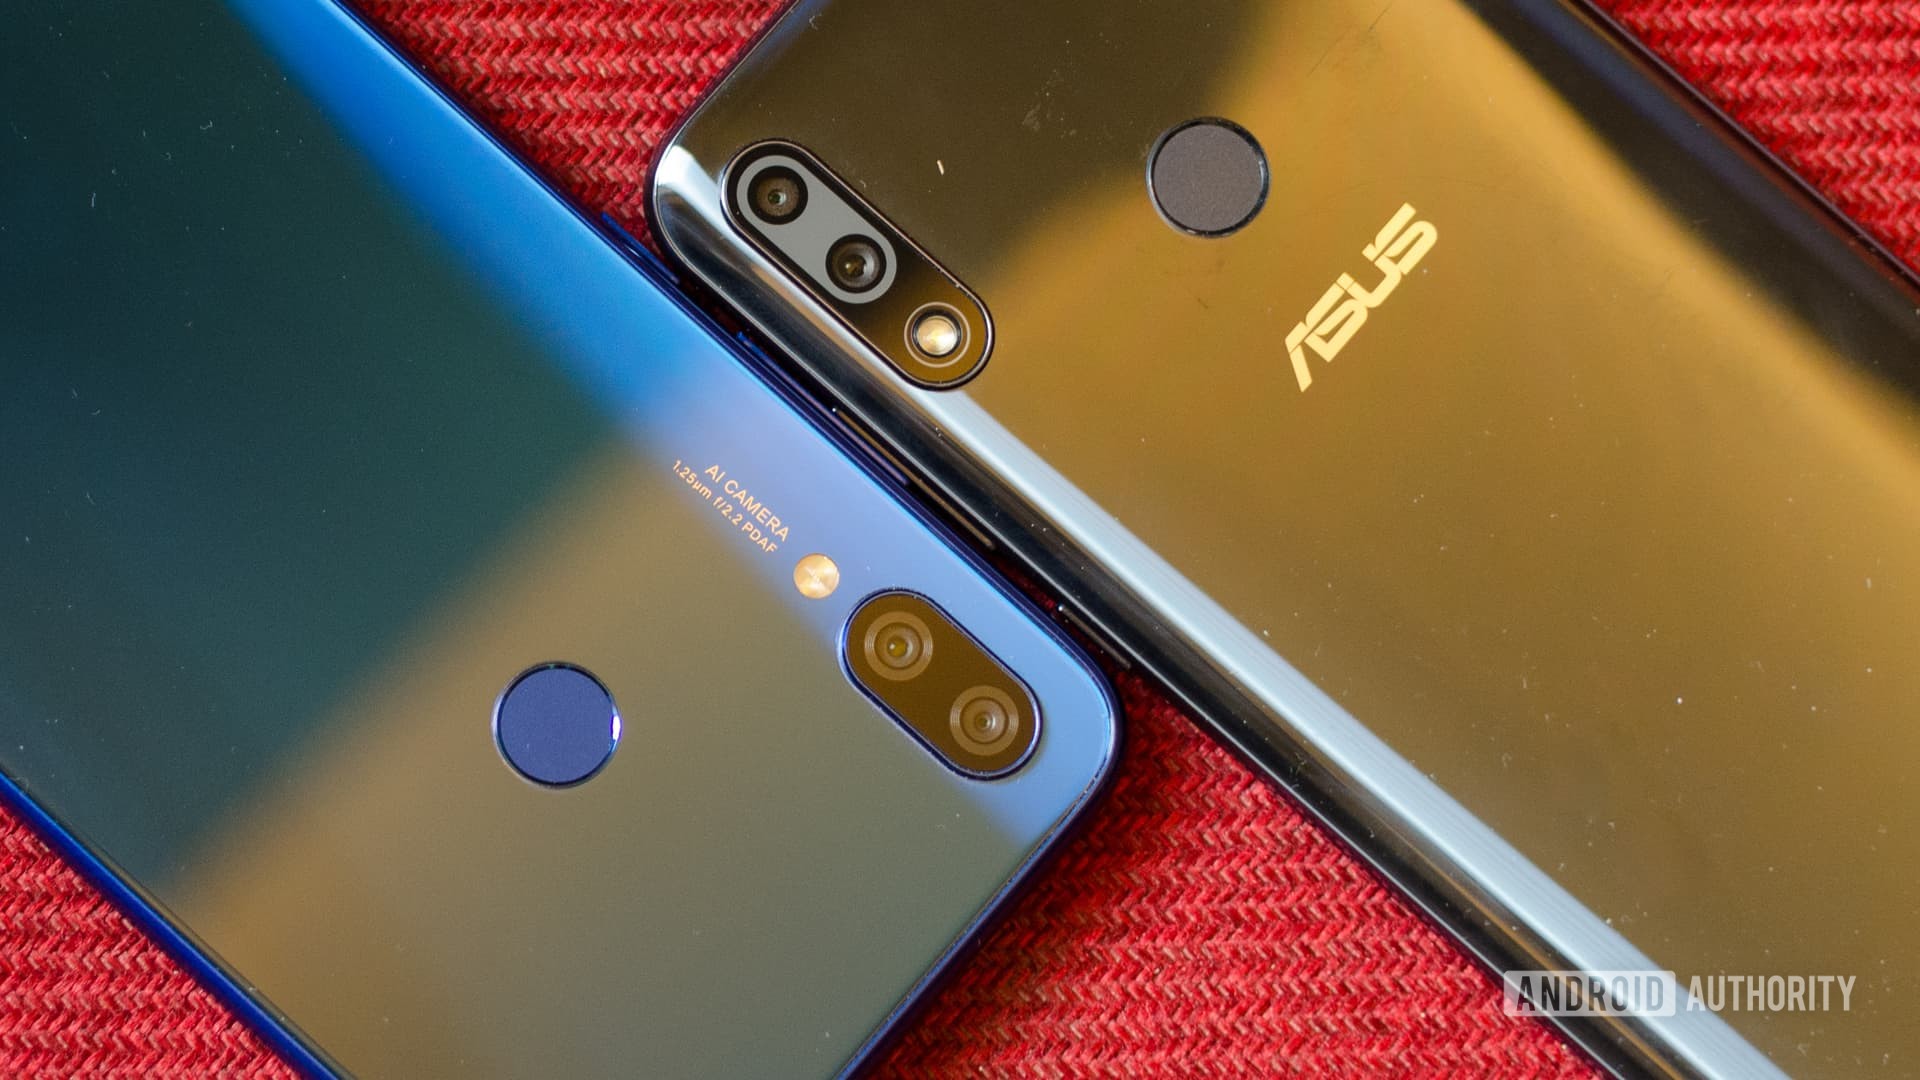 Redmi Note 7 vs ASUS Zenfone Max Pro M2 with cameras next to each other